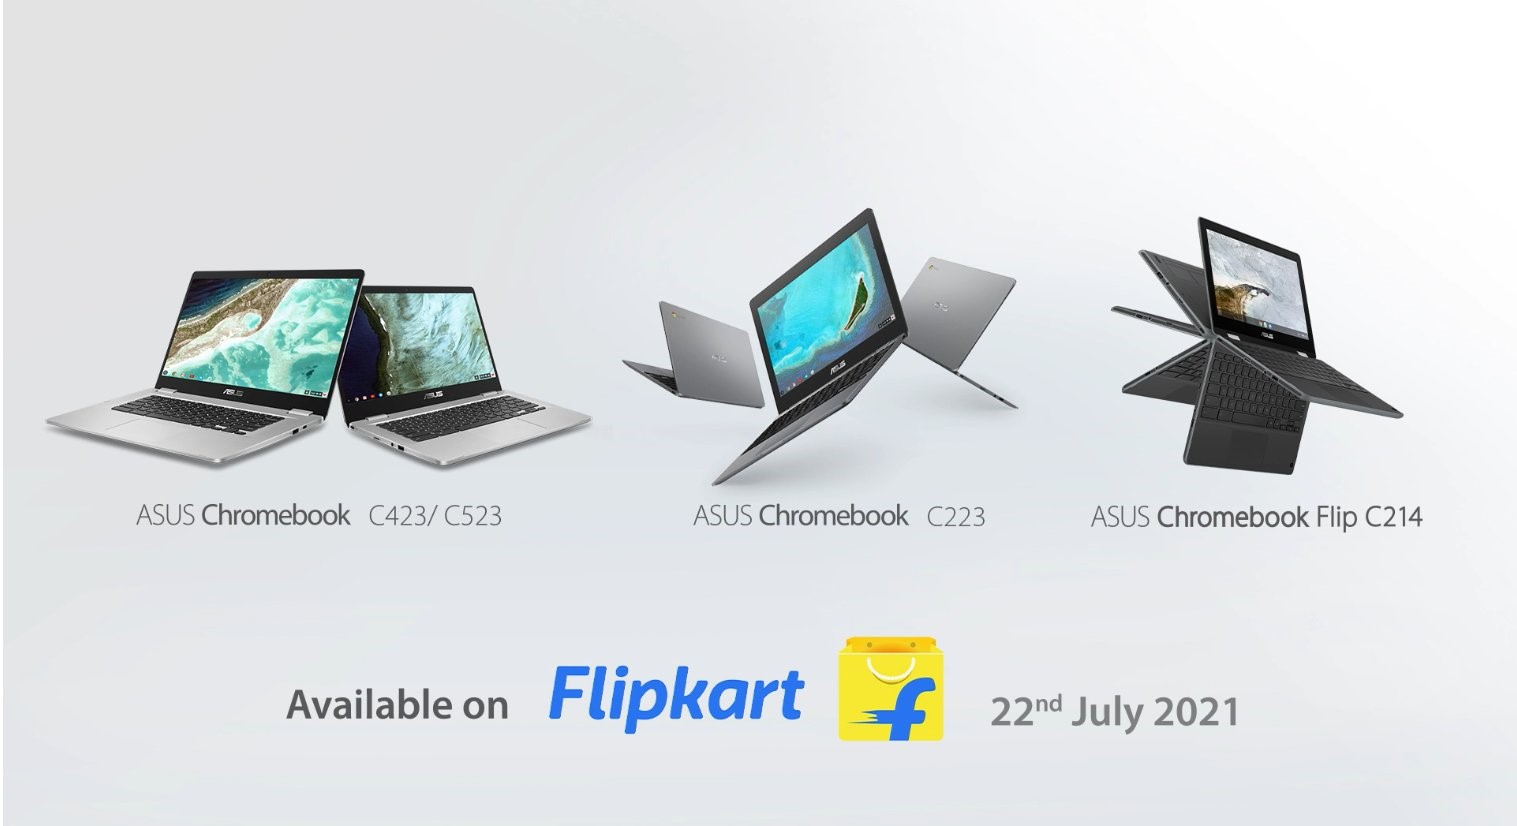 Asus Chromebooks Sale From Today; Check Prices And Also Price Cuts Available On Flipkart